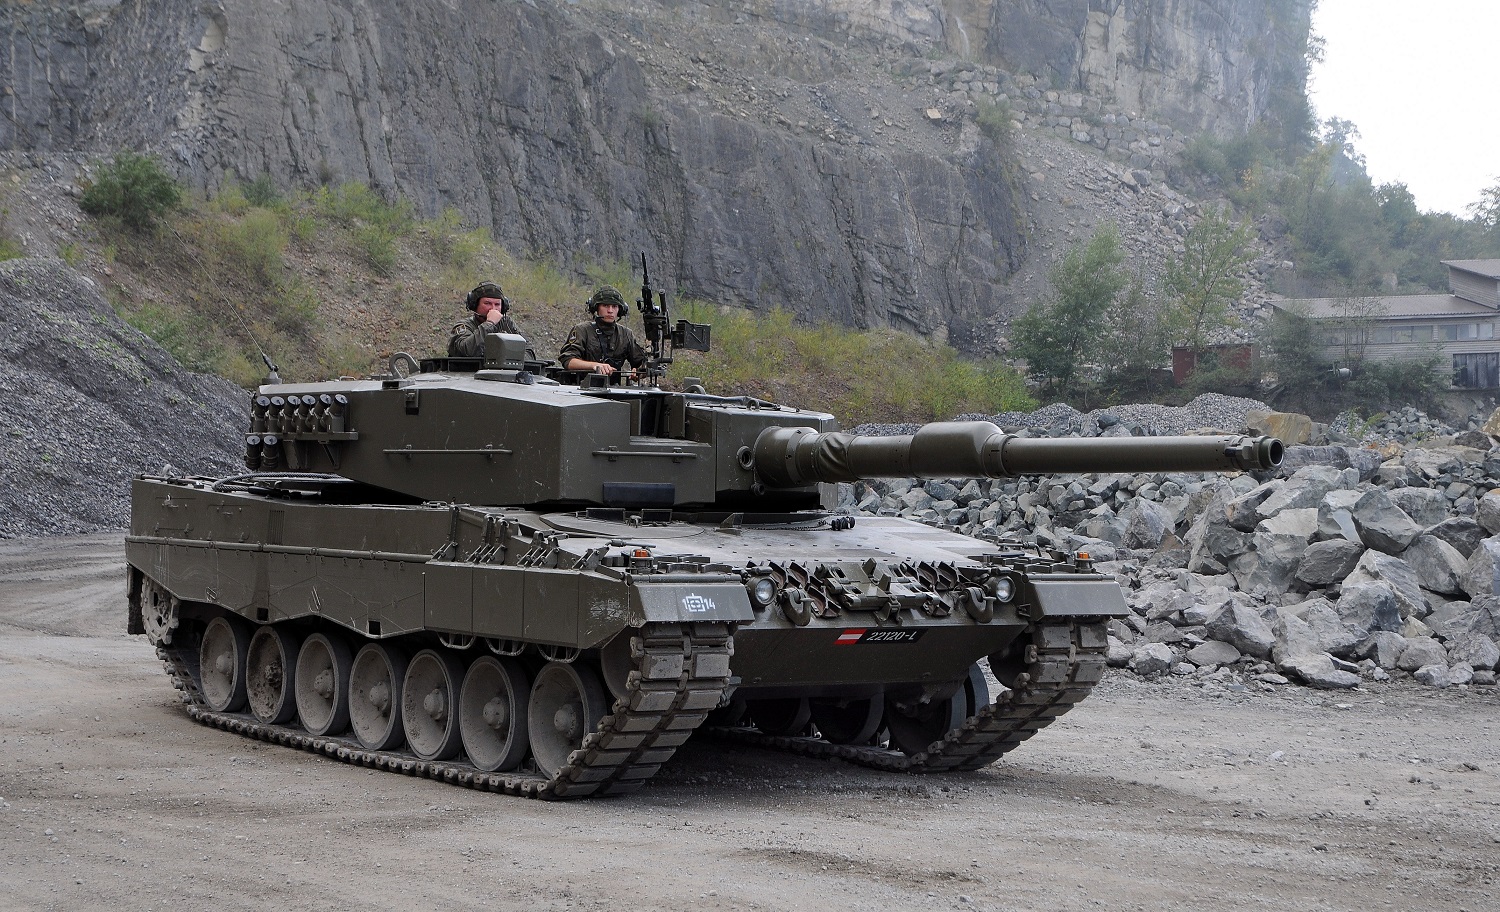 Spain will not transfer the Leopard 2A4 to Ukraine - the tanks are in terrible condition and cannot be upgraded